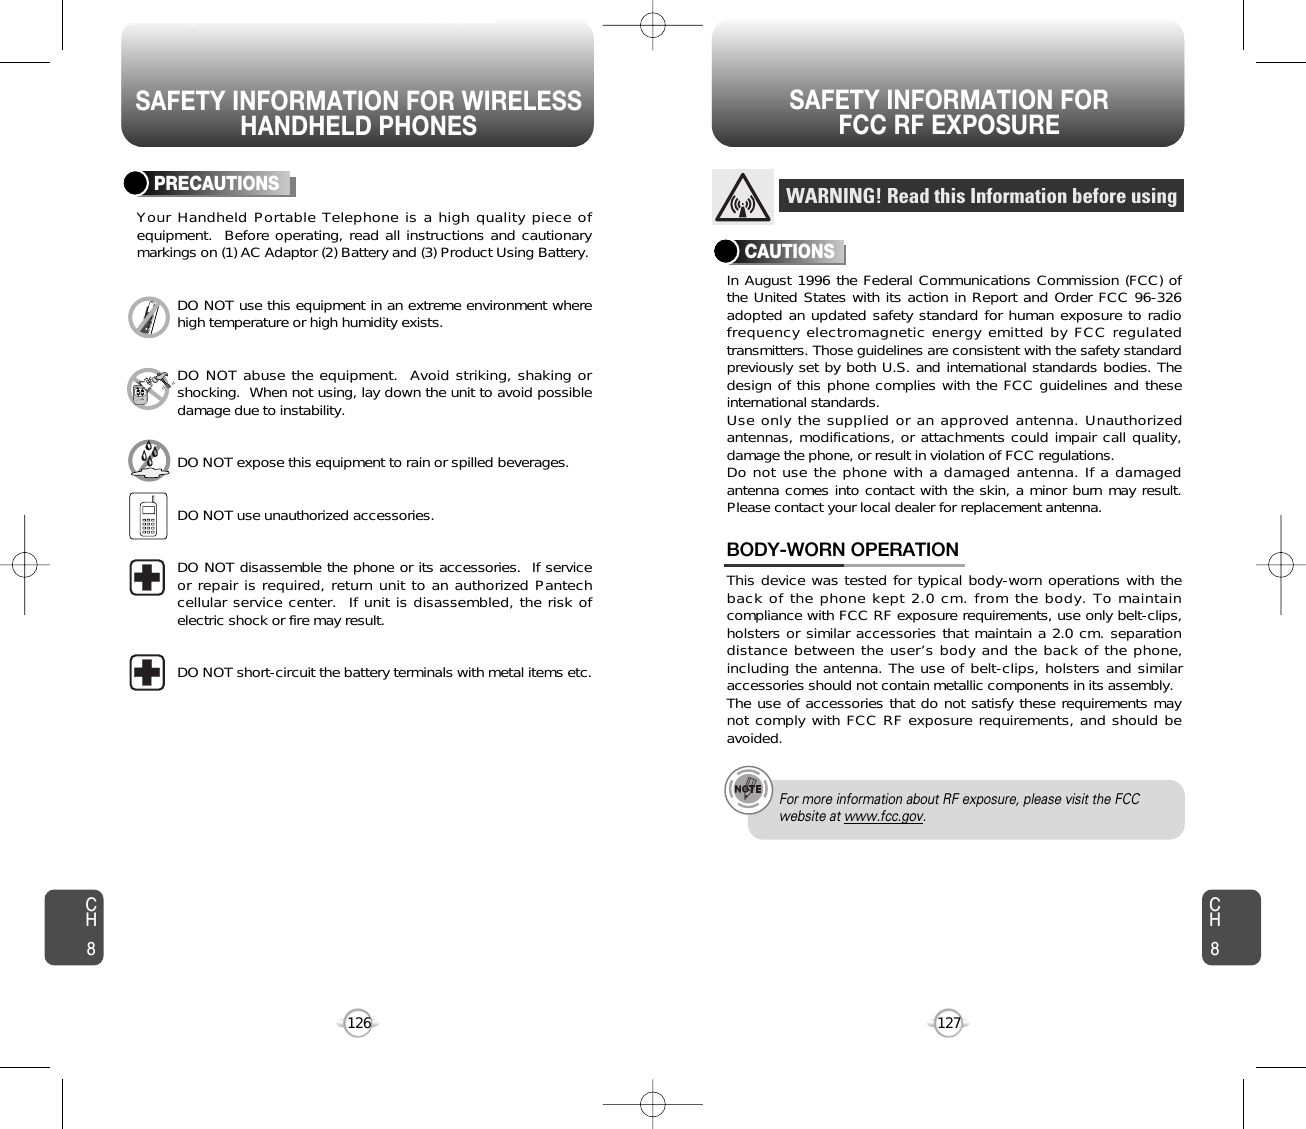 SAFETY INFORMATION FOR WIRELESSHANDHELD PHONESSAFETY INFORMATION FOR FCC RF EXPOSURE127126PRECAUTIONSYour Handheld Portable Telephone is a high quality piece ofequipment.  Before operating, read all instructions and cautionarymarkings on (1) AC Adaptor (2) Battery and (3) Product Using Battery.DO NOT use this equipment in an extreme environment wherehigh temperature or high humidity exists.DO NOT abuse the equipment.  Avoid striking, shaking orshocking.  When not using, lay down the unit to avoid possibledamage due to instability.DO NOT expose this equipment to rain or spilled beverages.DO NOT use unauthorized accessories.DO NOT disassemble the phone or its accessories.  If serviceor repair is required, return unit to an authorized Pantechcellular service center.  If unit is disassembled, the risk ofelectric shock or fire may result.DO NOT short-circuit the battery terminals with metal items etc.In August 1996 the Federal Communications Commission (FCC) ofthe United States with its action in Report and Order FCC 96-326adopted an updated safety standard for human exposure to radiofrequency electromagnetic energy emitted by FCC regulatedtransmitters. Those guidelines are consistent with the safety standardpreviously set by both U.S. and international standards bodies. Thedesign of this phone complies with the FCC guidelines and theseinternational standards.Use only the supplied or an approved antenna. Unauthorizedantennas, modifications, or attachments could impair call quality,damage the phone, or result in violation of FCC regulations.Do not use the phone with a damaged antenna. If a damagedantenna comes into contact with the skin, a minor burn may result.Please contact your local dealer for replacement antenna.This device was tested for typical body-worn operations with theback of the phone kept 2.0 cm. from the body. To maintaincompliance with FCC RF exposure requirements, use only belt-clips,holsters or similar accessories that maintain a 2.0 cm. separationdistance between the user’s body and the back of the phone,including the antenna. The use of belt-clips, holsters and similaraccessories should not contain metallic components in its assembly.The use of accessories that do not satisfy these requirements maynot comply with FCC RF exposure requirements, and should beavoided.BODY-WORN OPERATIONWARNING! Read this Information before usingCAUTIONSFor more information about RF exposure, please visit the FCCwebsite at www.fcc.gov.CH8CH8